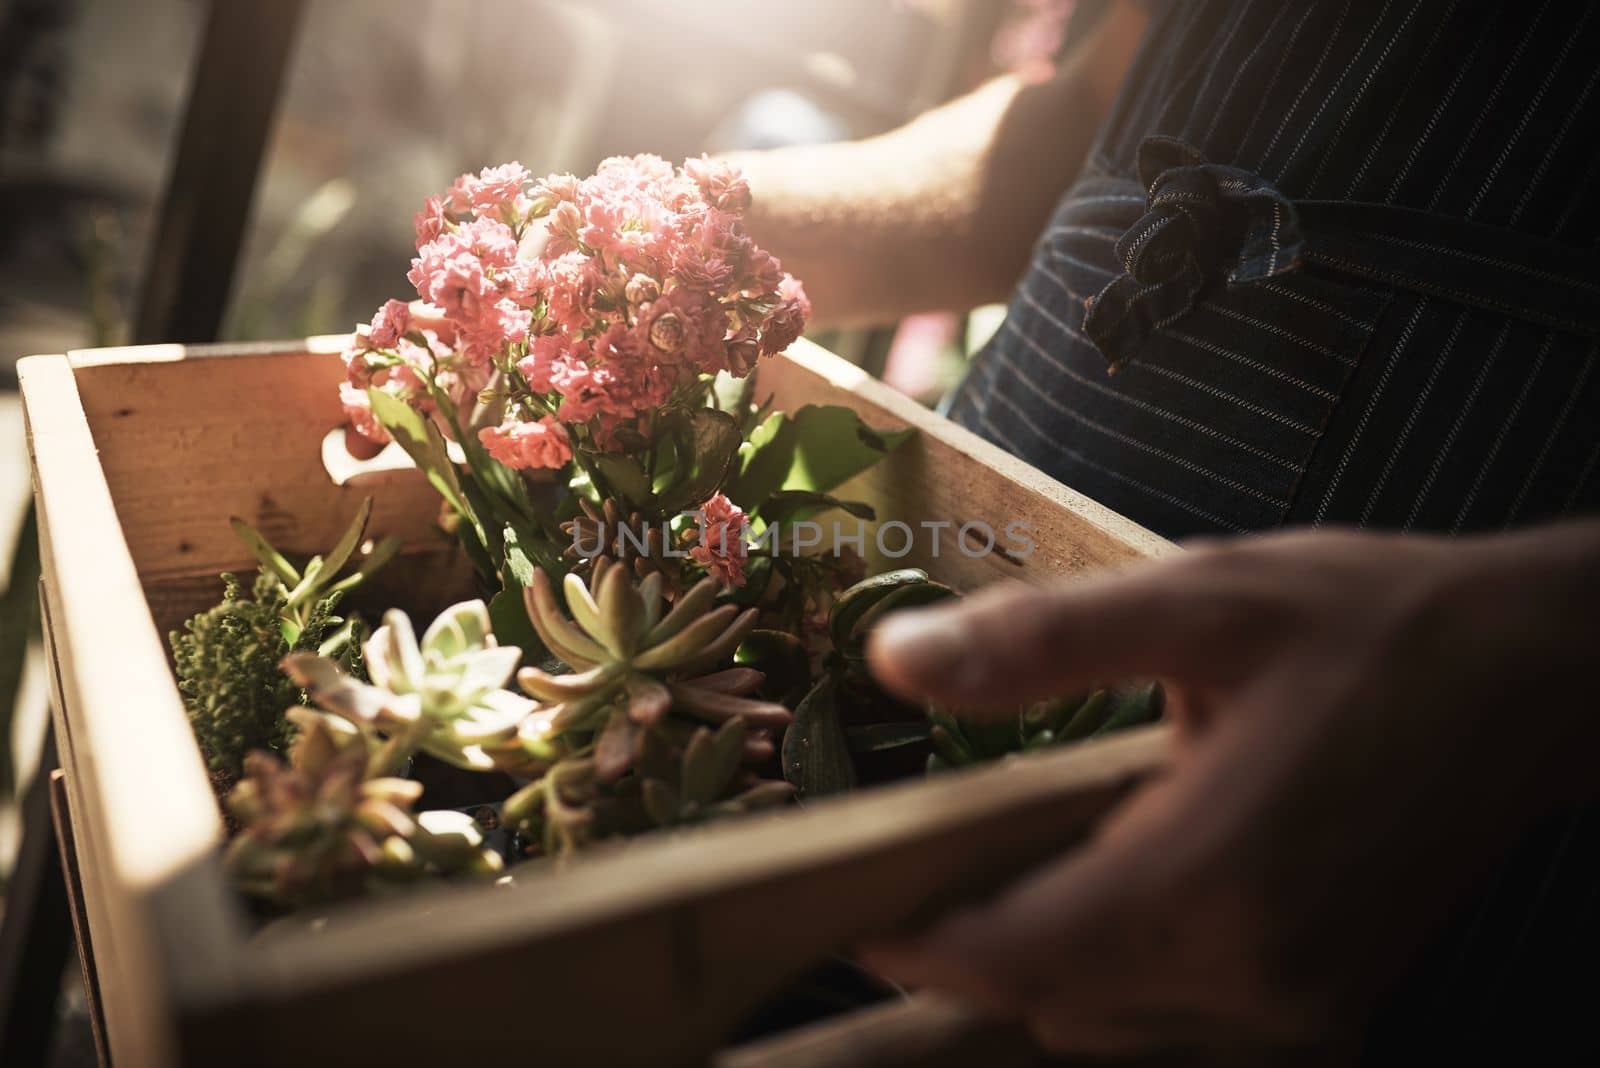 Im carrying precious cargo. an unrecognizable florist holding a crate full of flowers inside a plant nursery. by YuriArcurs